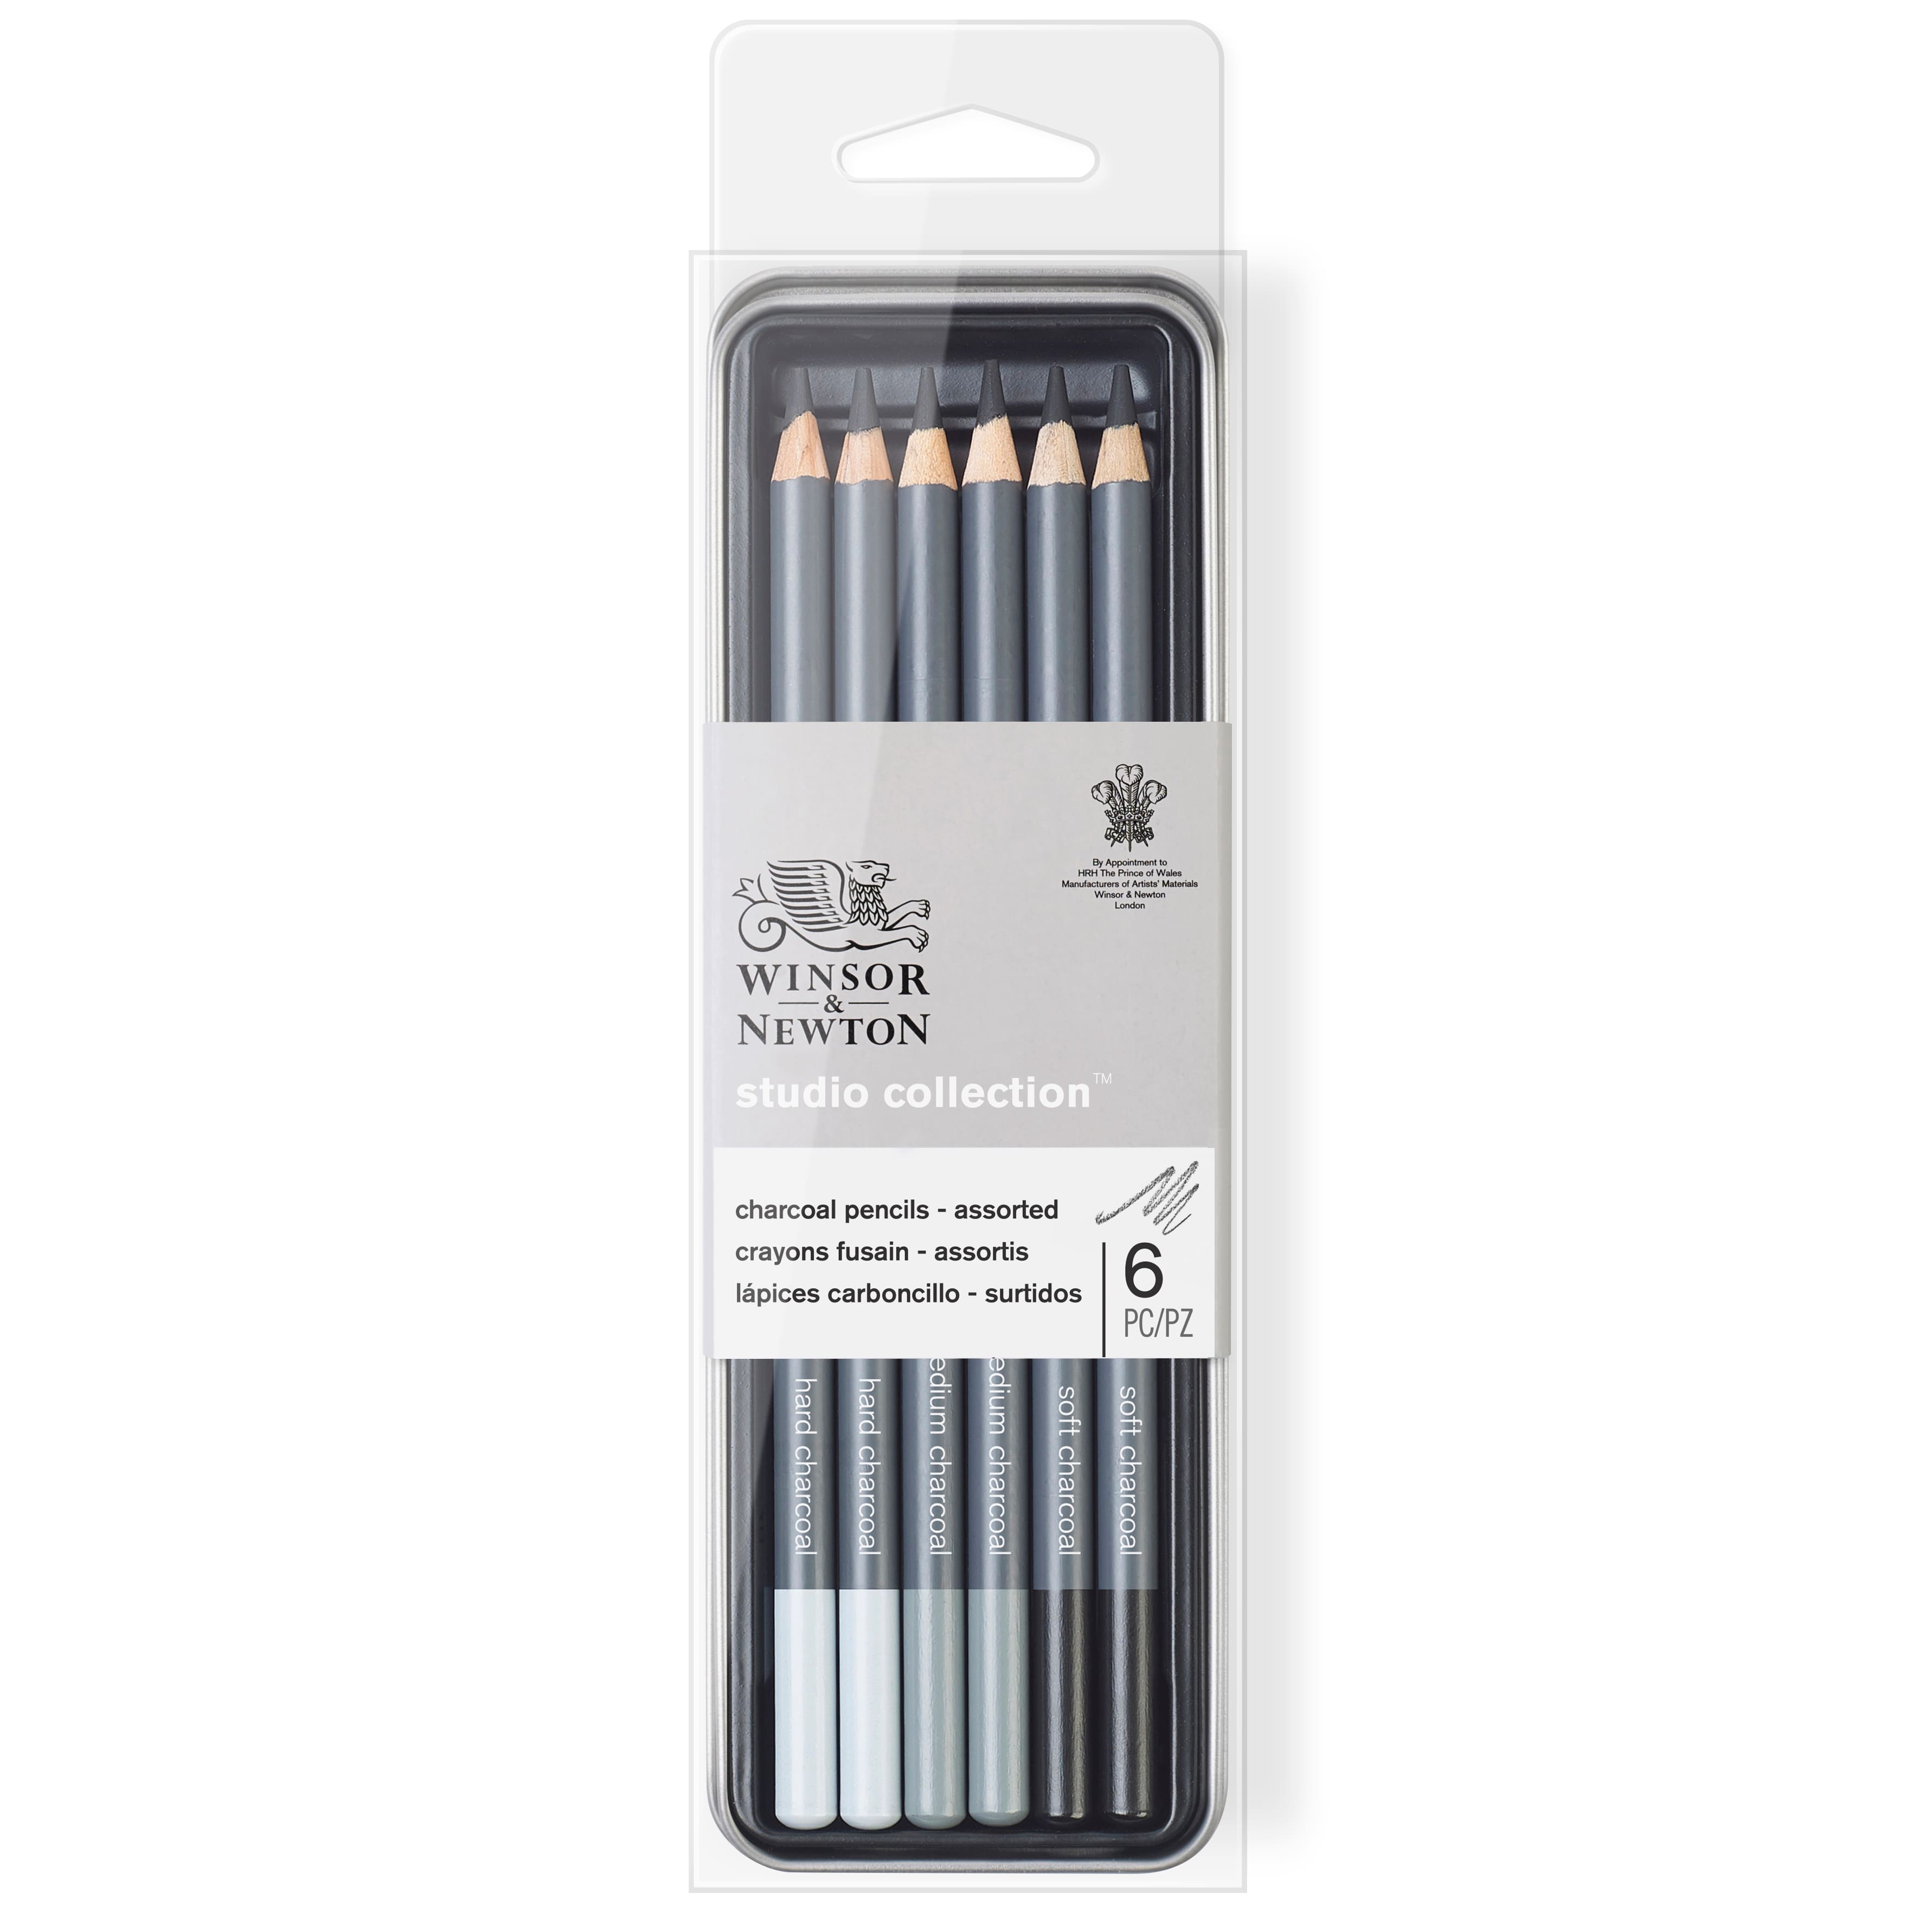 Incraftables Drawing Pencils for Sketching & Shading. Art Sketch Pencils  Set for Adults & kids. Drawing Supplies Sketch Kit with 21 Graphite &  Charcoal Pencils, Erasers, Sandpaper, Knife & Sharpener